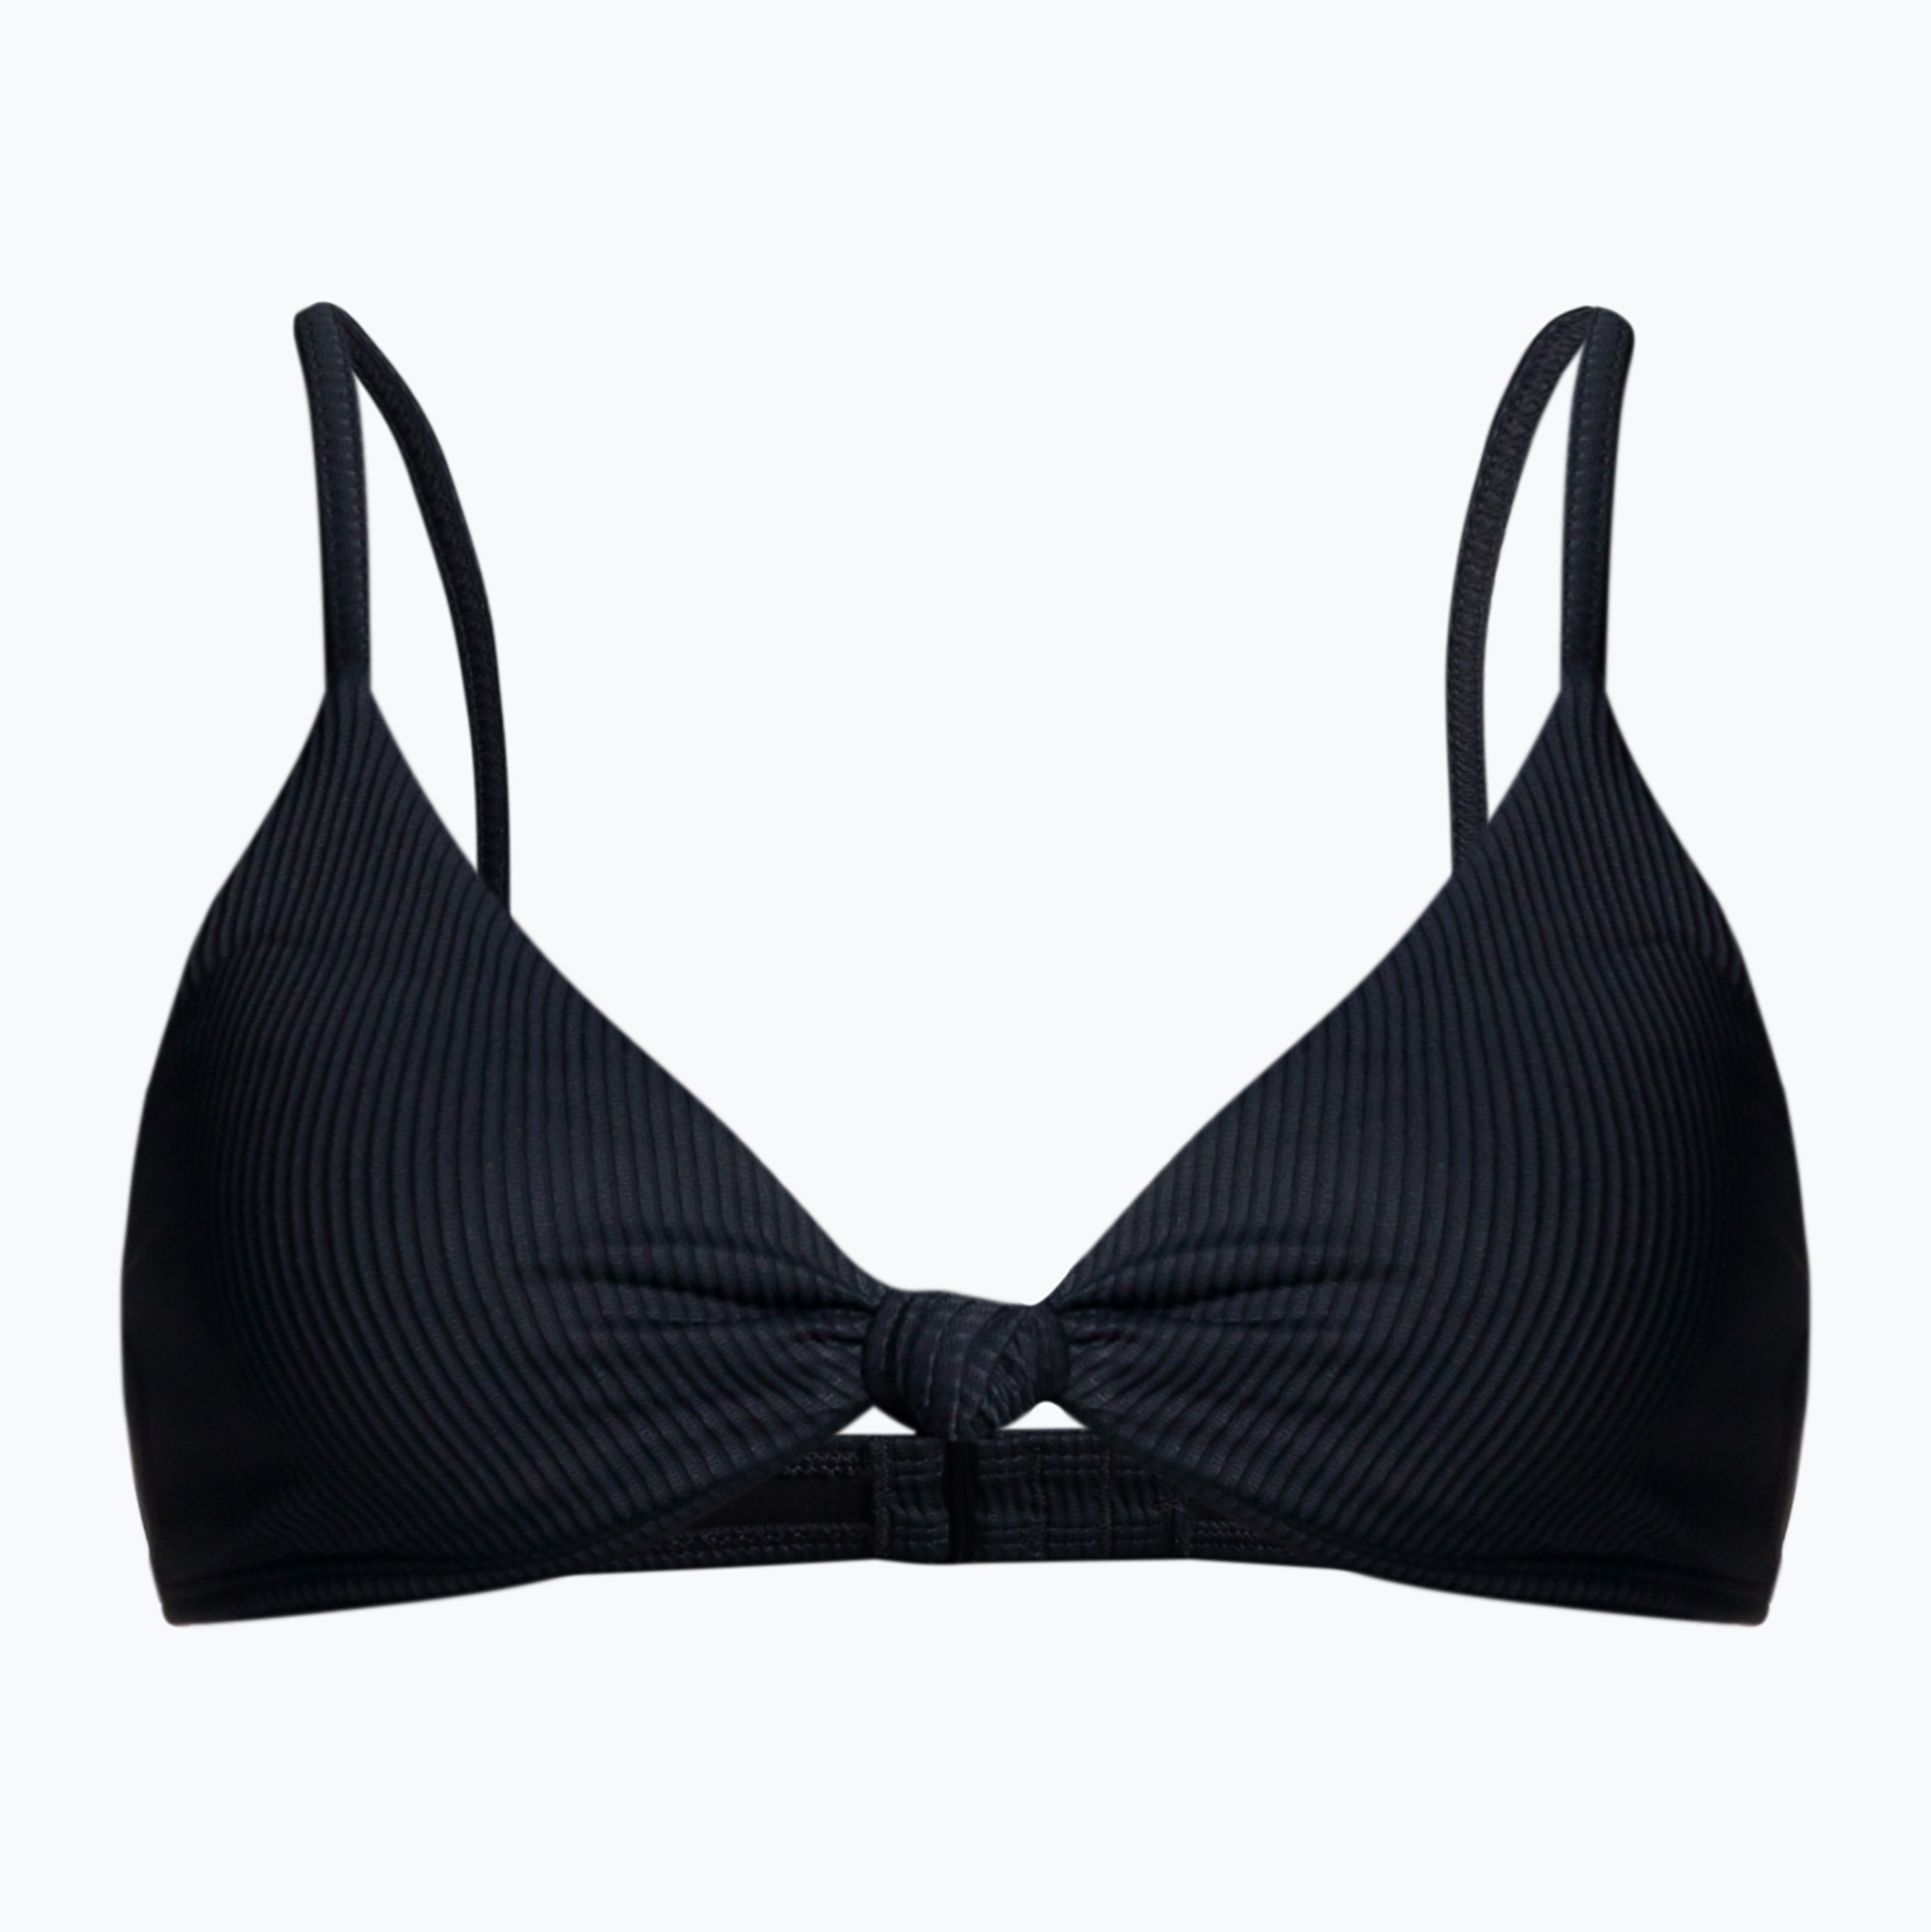 Costum de baie top ROXY Love The Surf Knot 2021 anthracite